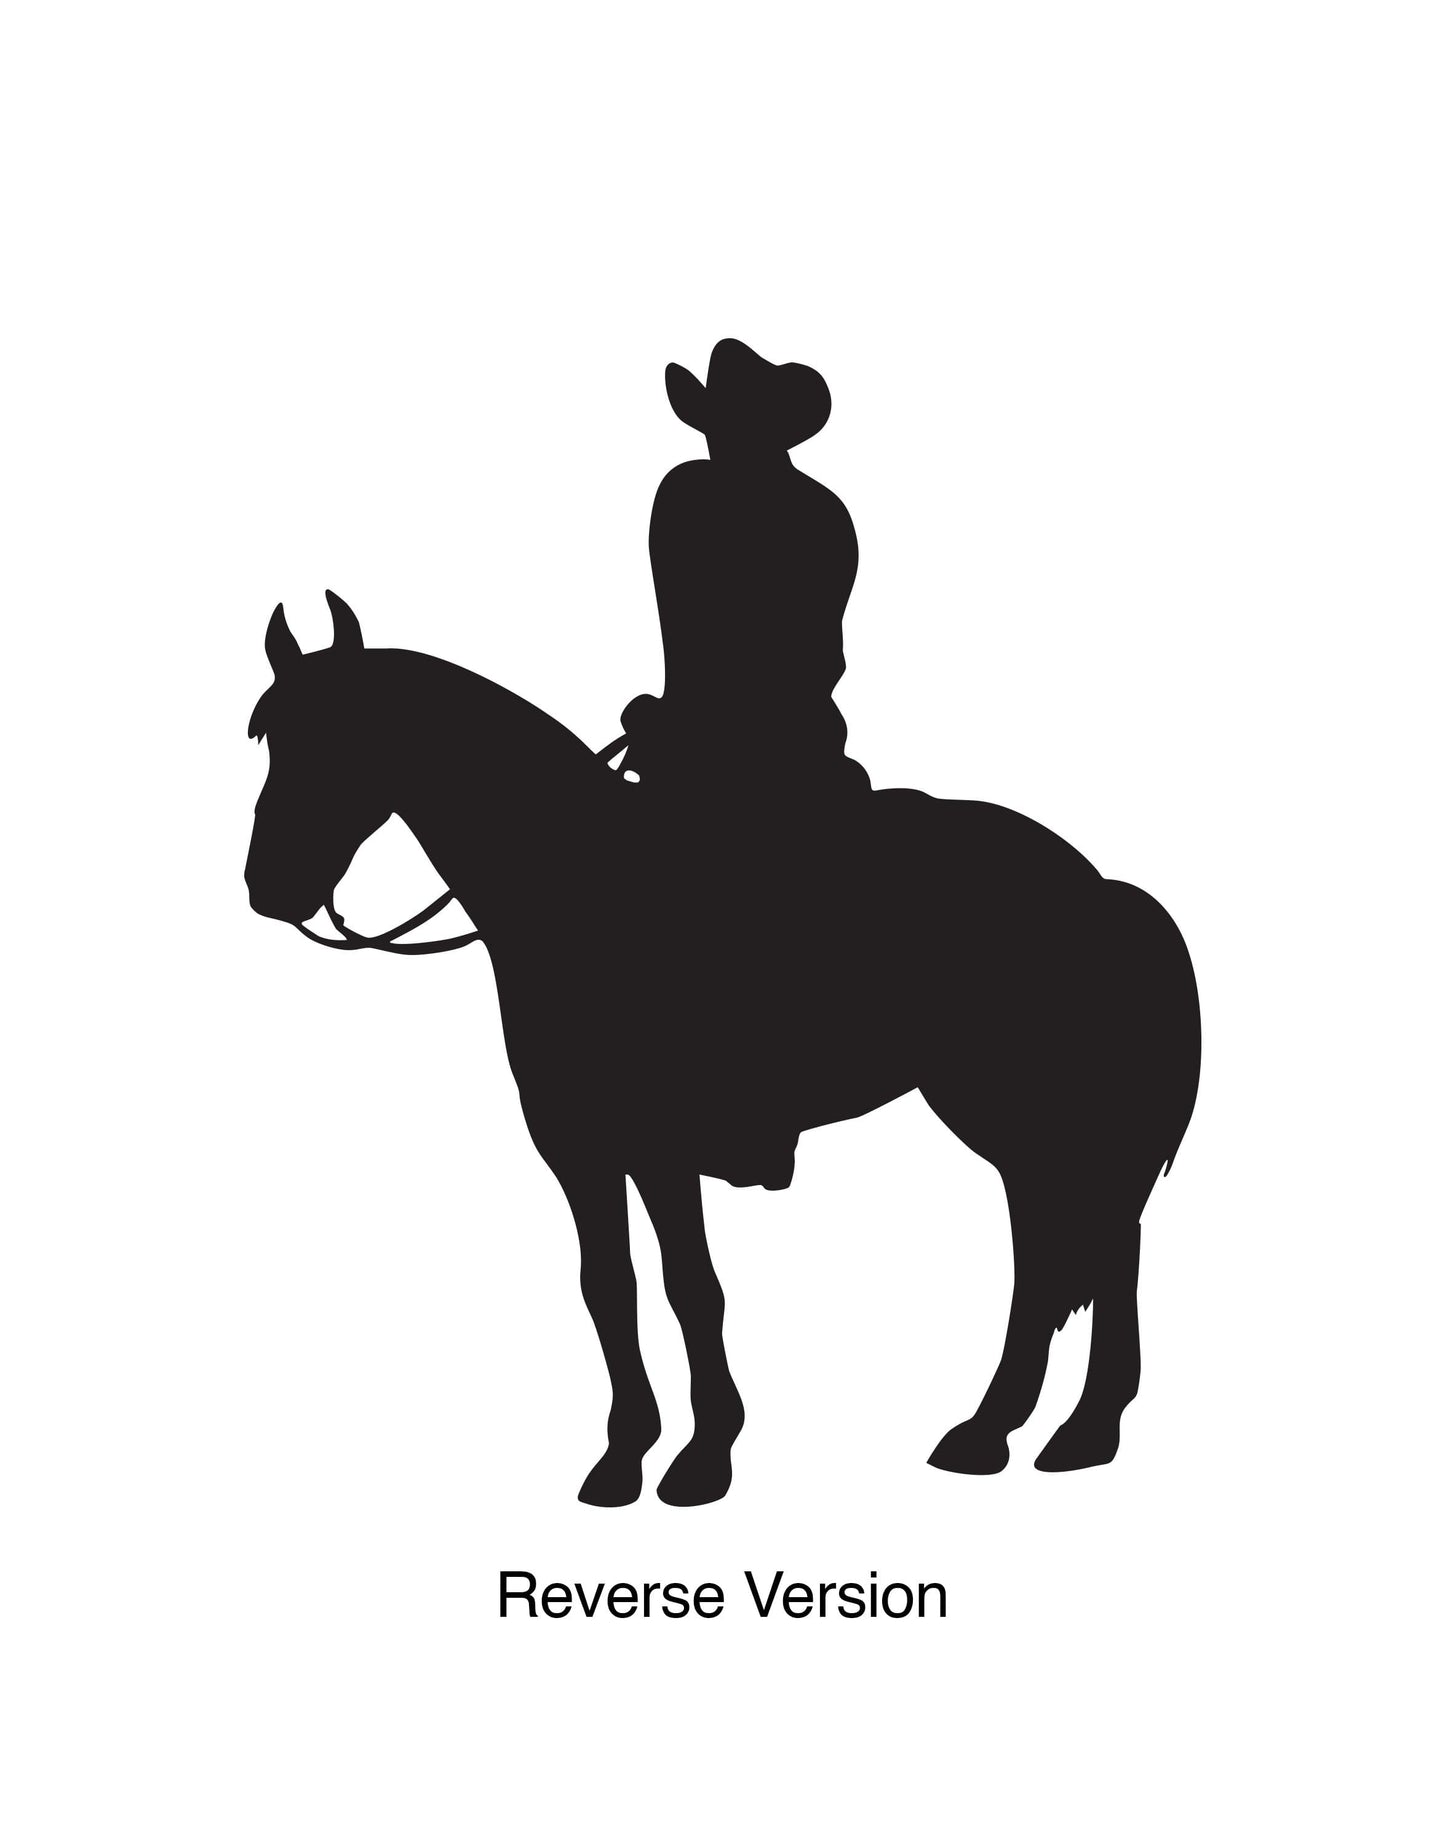 Cowboy on Horse Wall Decal. #200